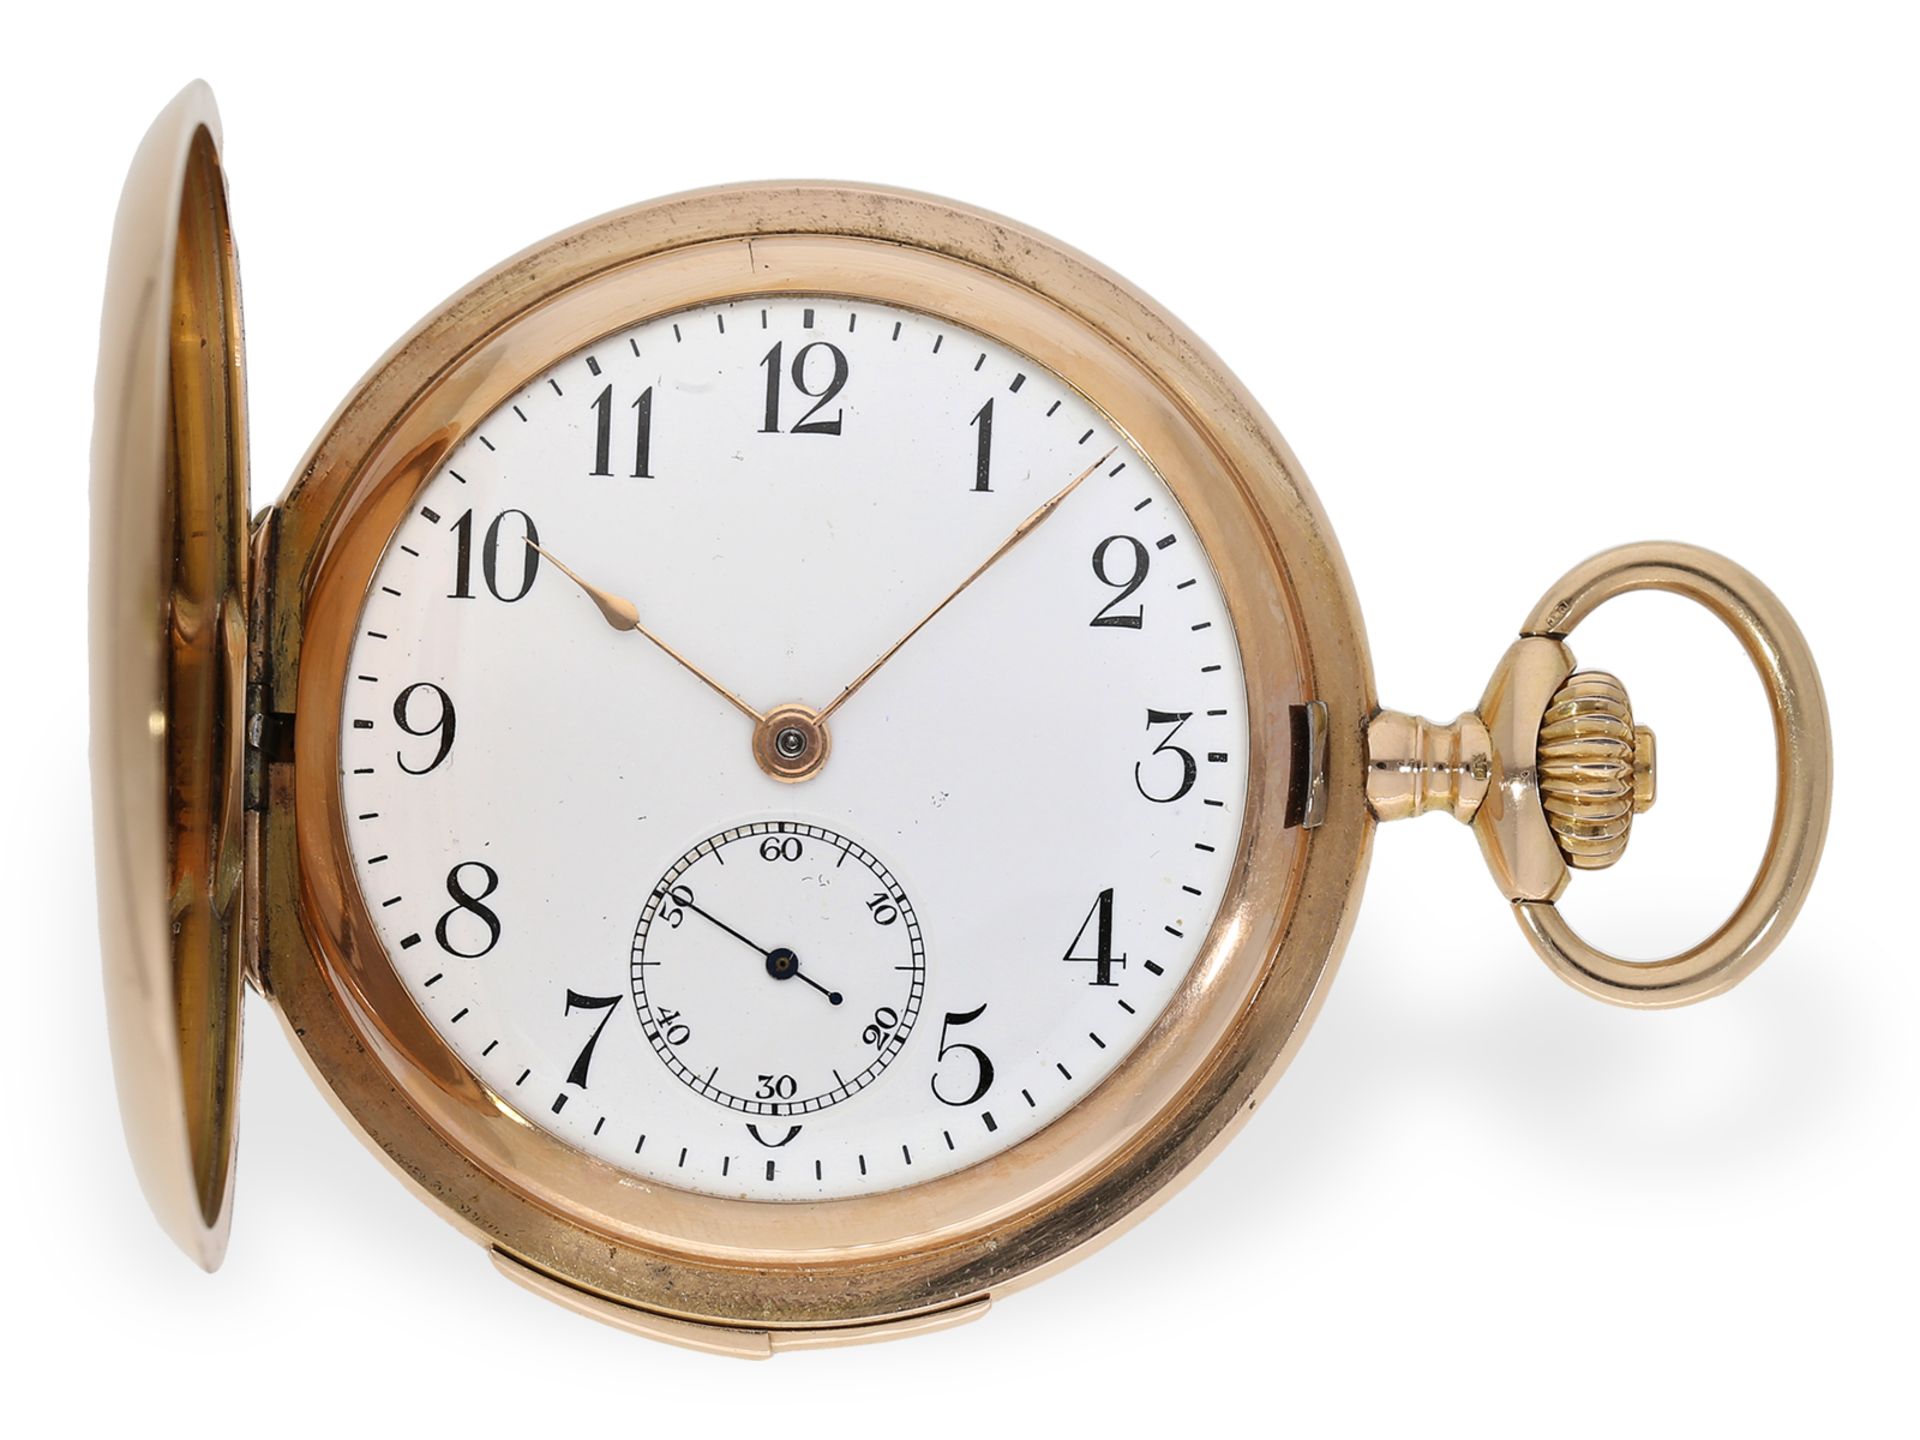 Pocket watch: very fine gold hunting case watch with quarter-hour repeater, probably Piguet calibre,